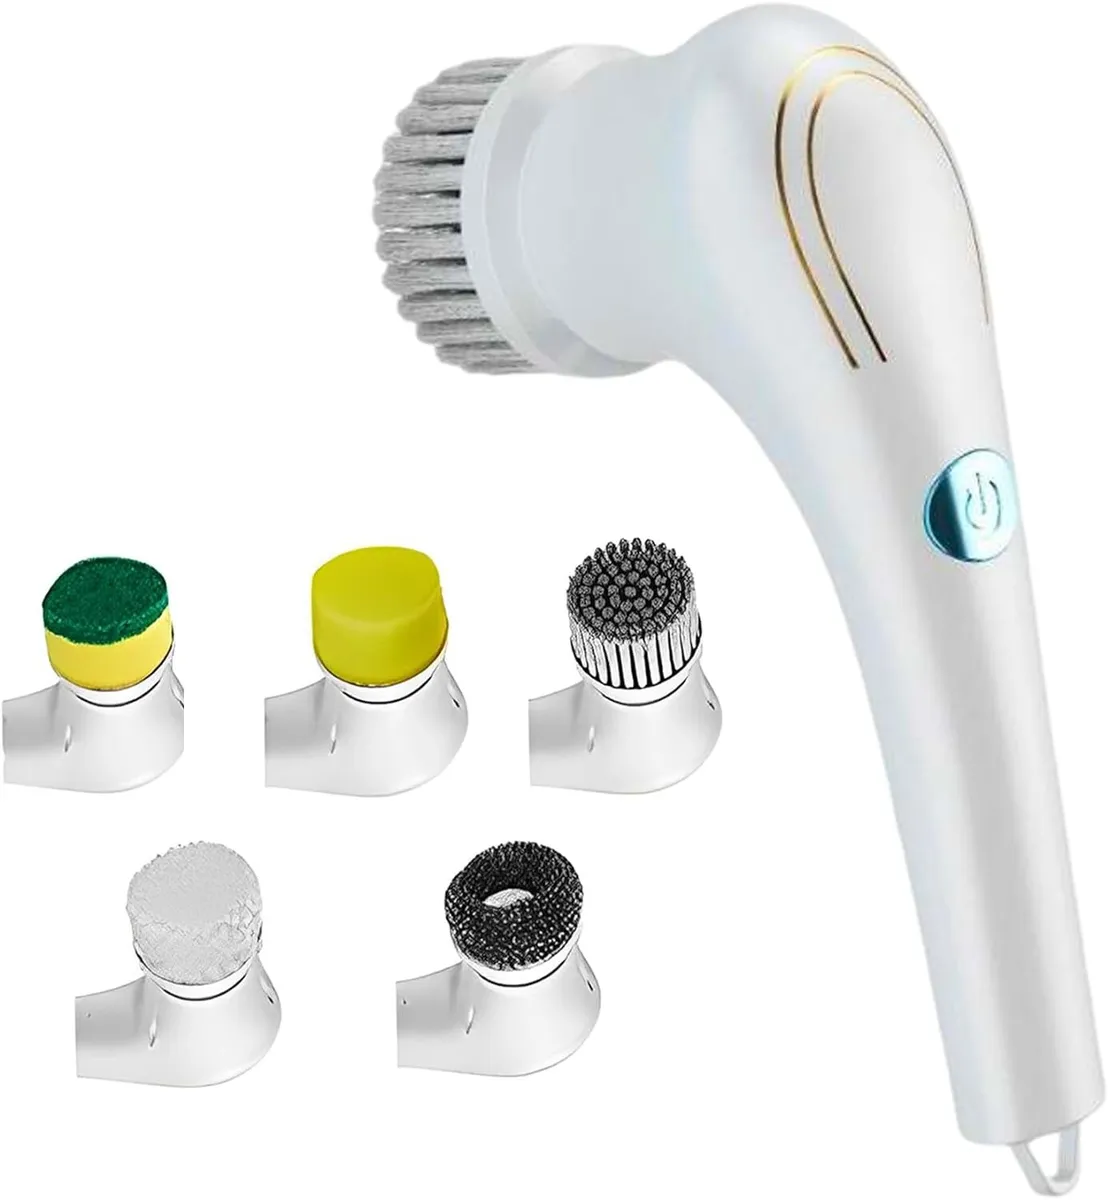 Handheld Cleaning Brush with 5 Replaceable Heads for Bathroom Kitchen Floor  Dish